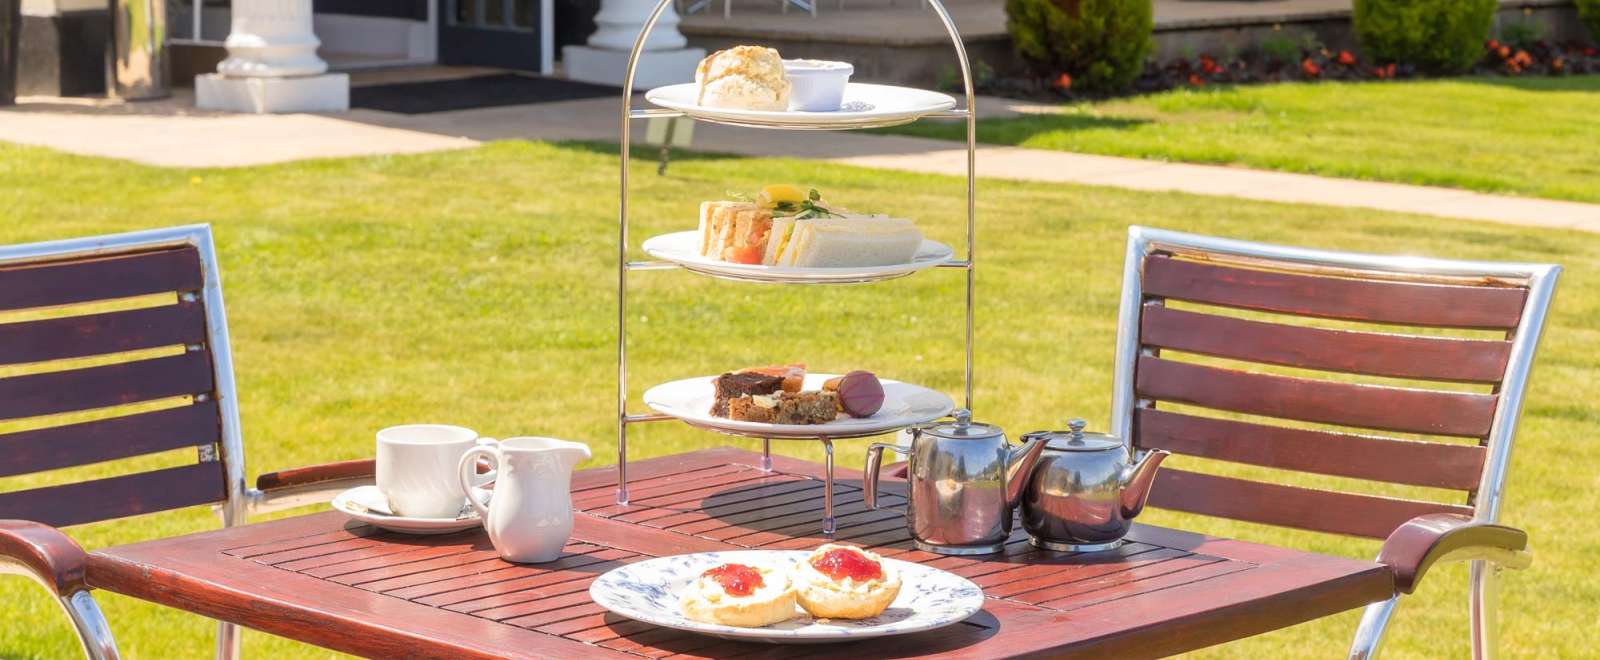 Devon Hotel Carriages Restaurant Dining Afternoon Tea Outdoors